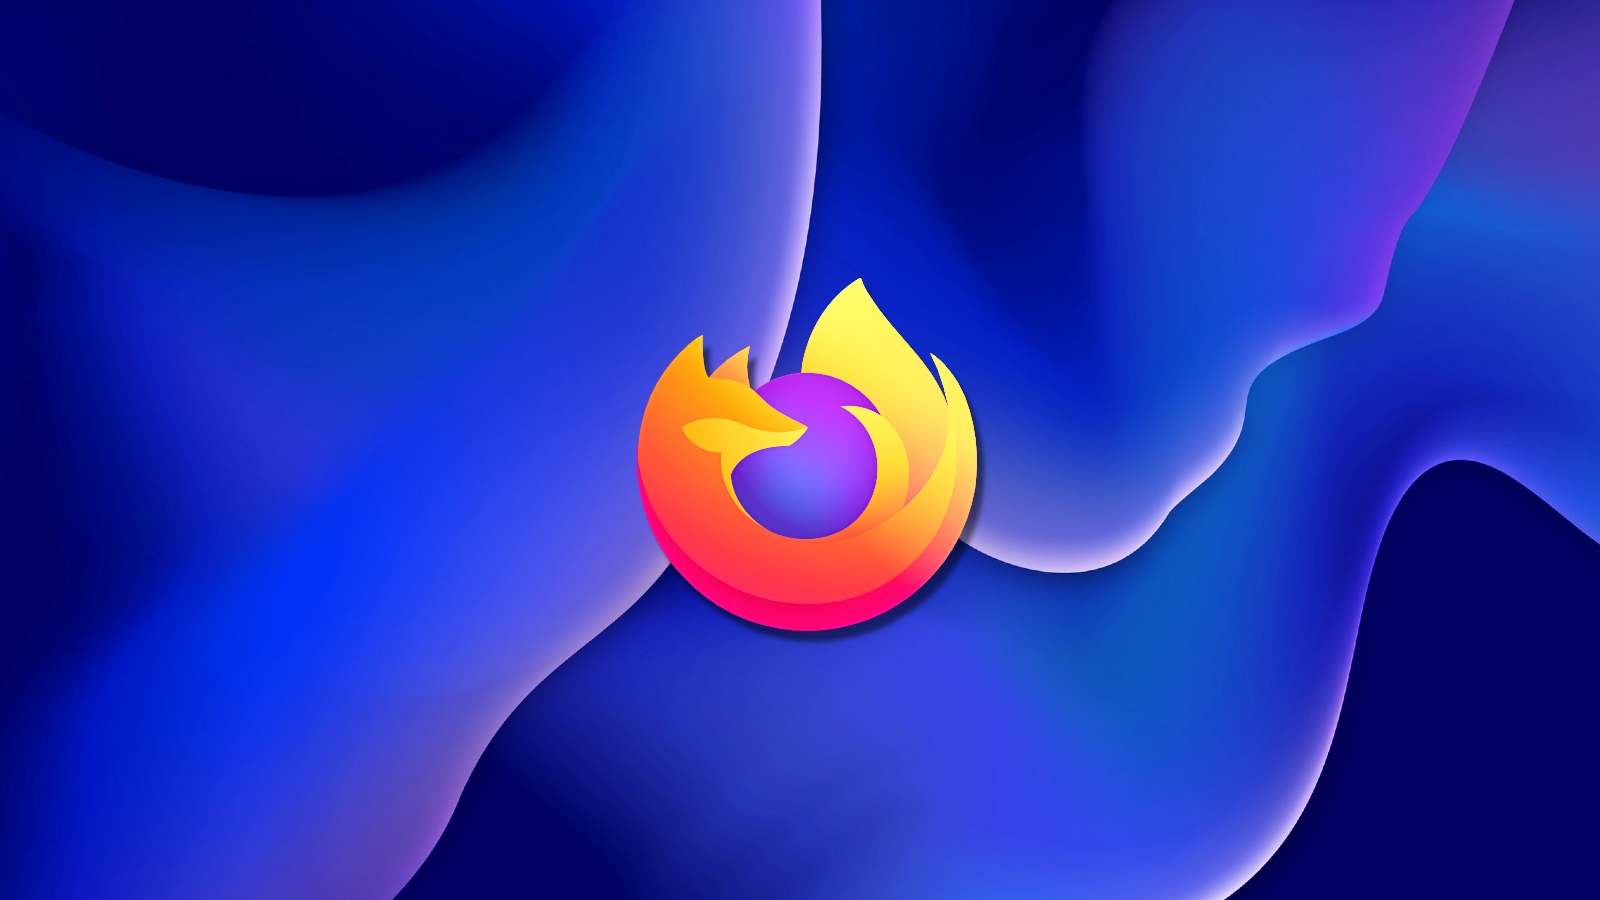 Mozilla has announced the integration of Firefox Relay, an email protection system that helps users evade trackers and spammers, directly into the Fir